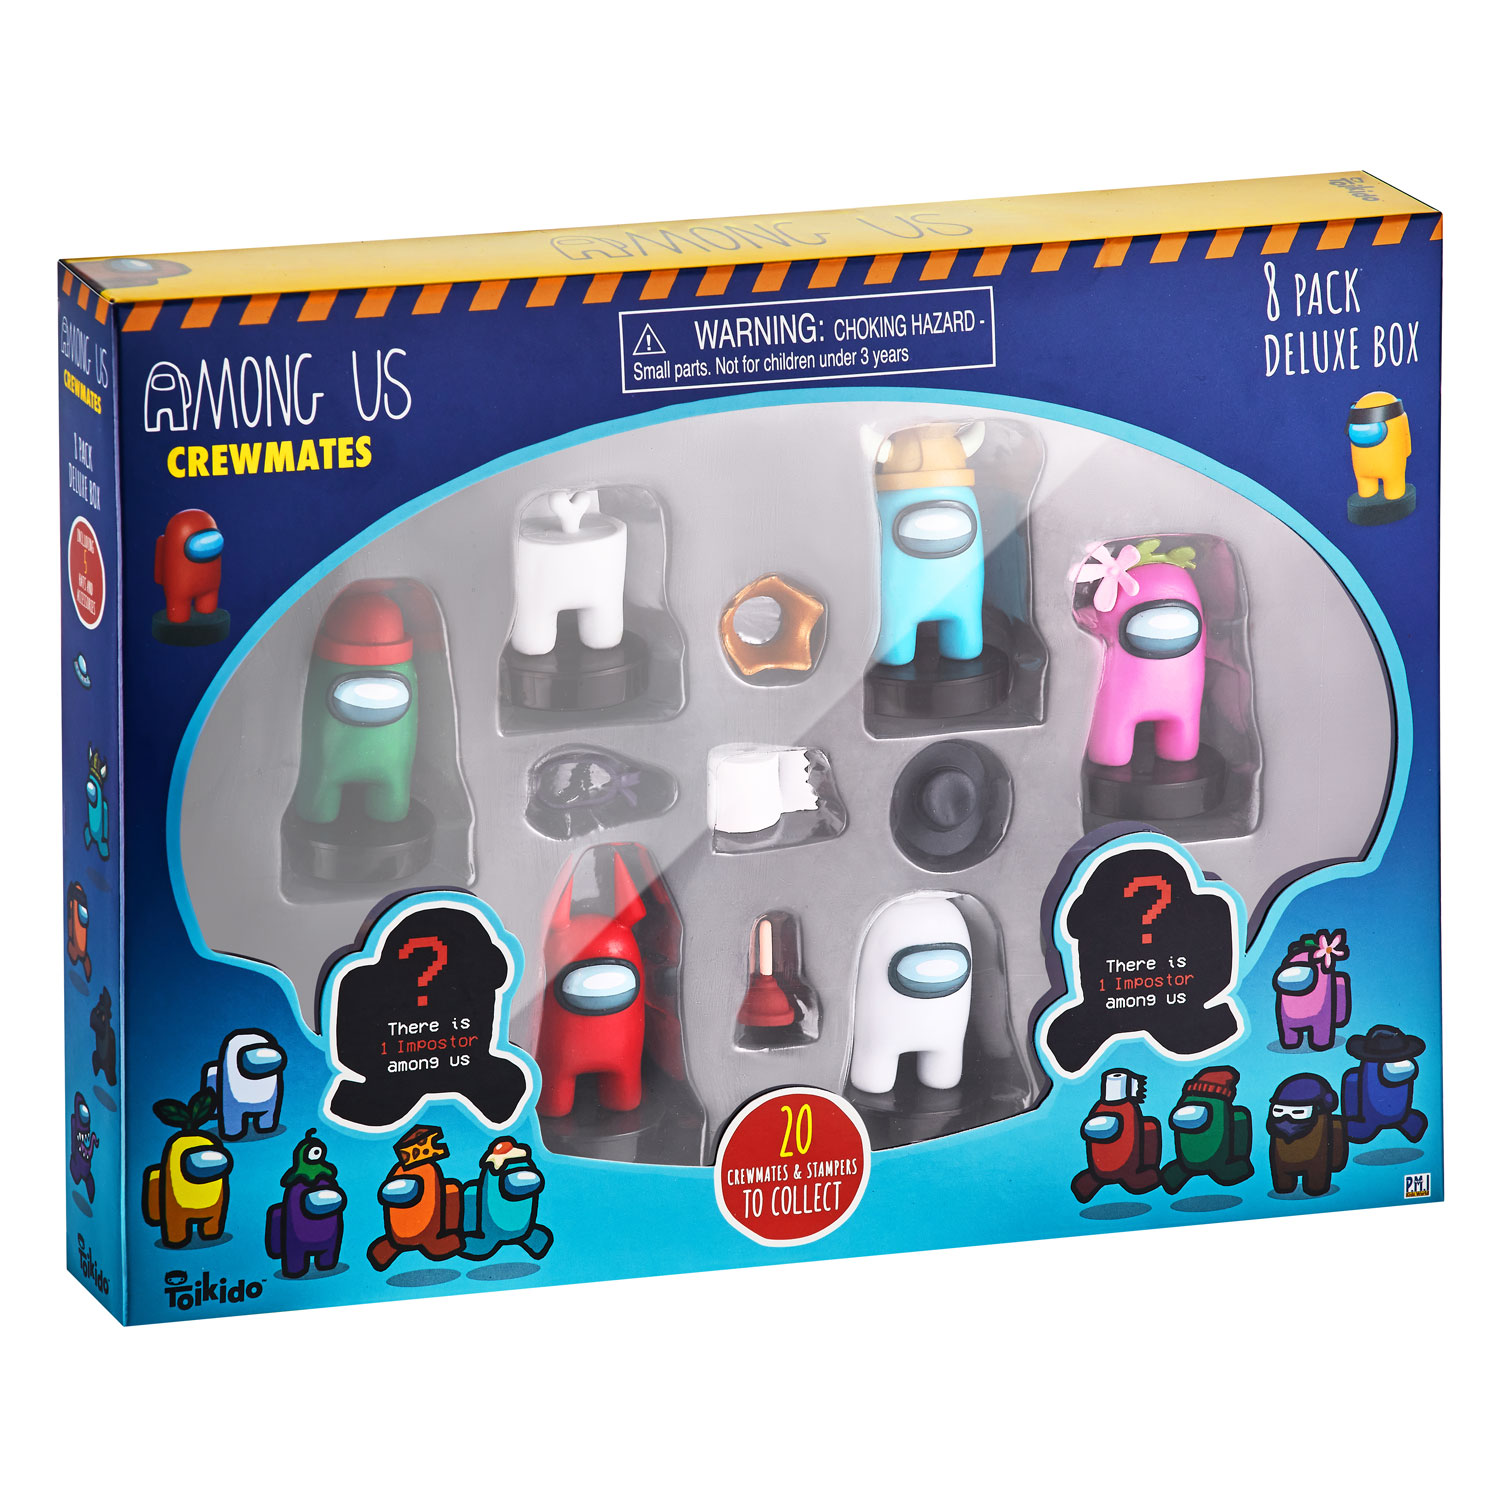 Among Us - Series 1 Crewmates, collectible stamper figures deluxe box ...